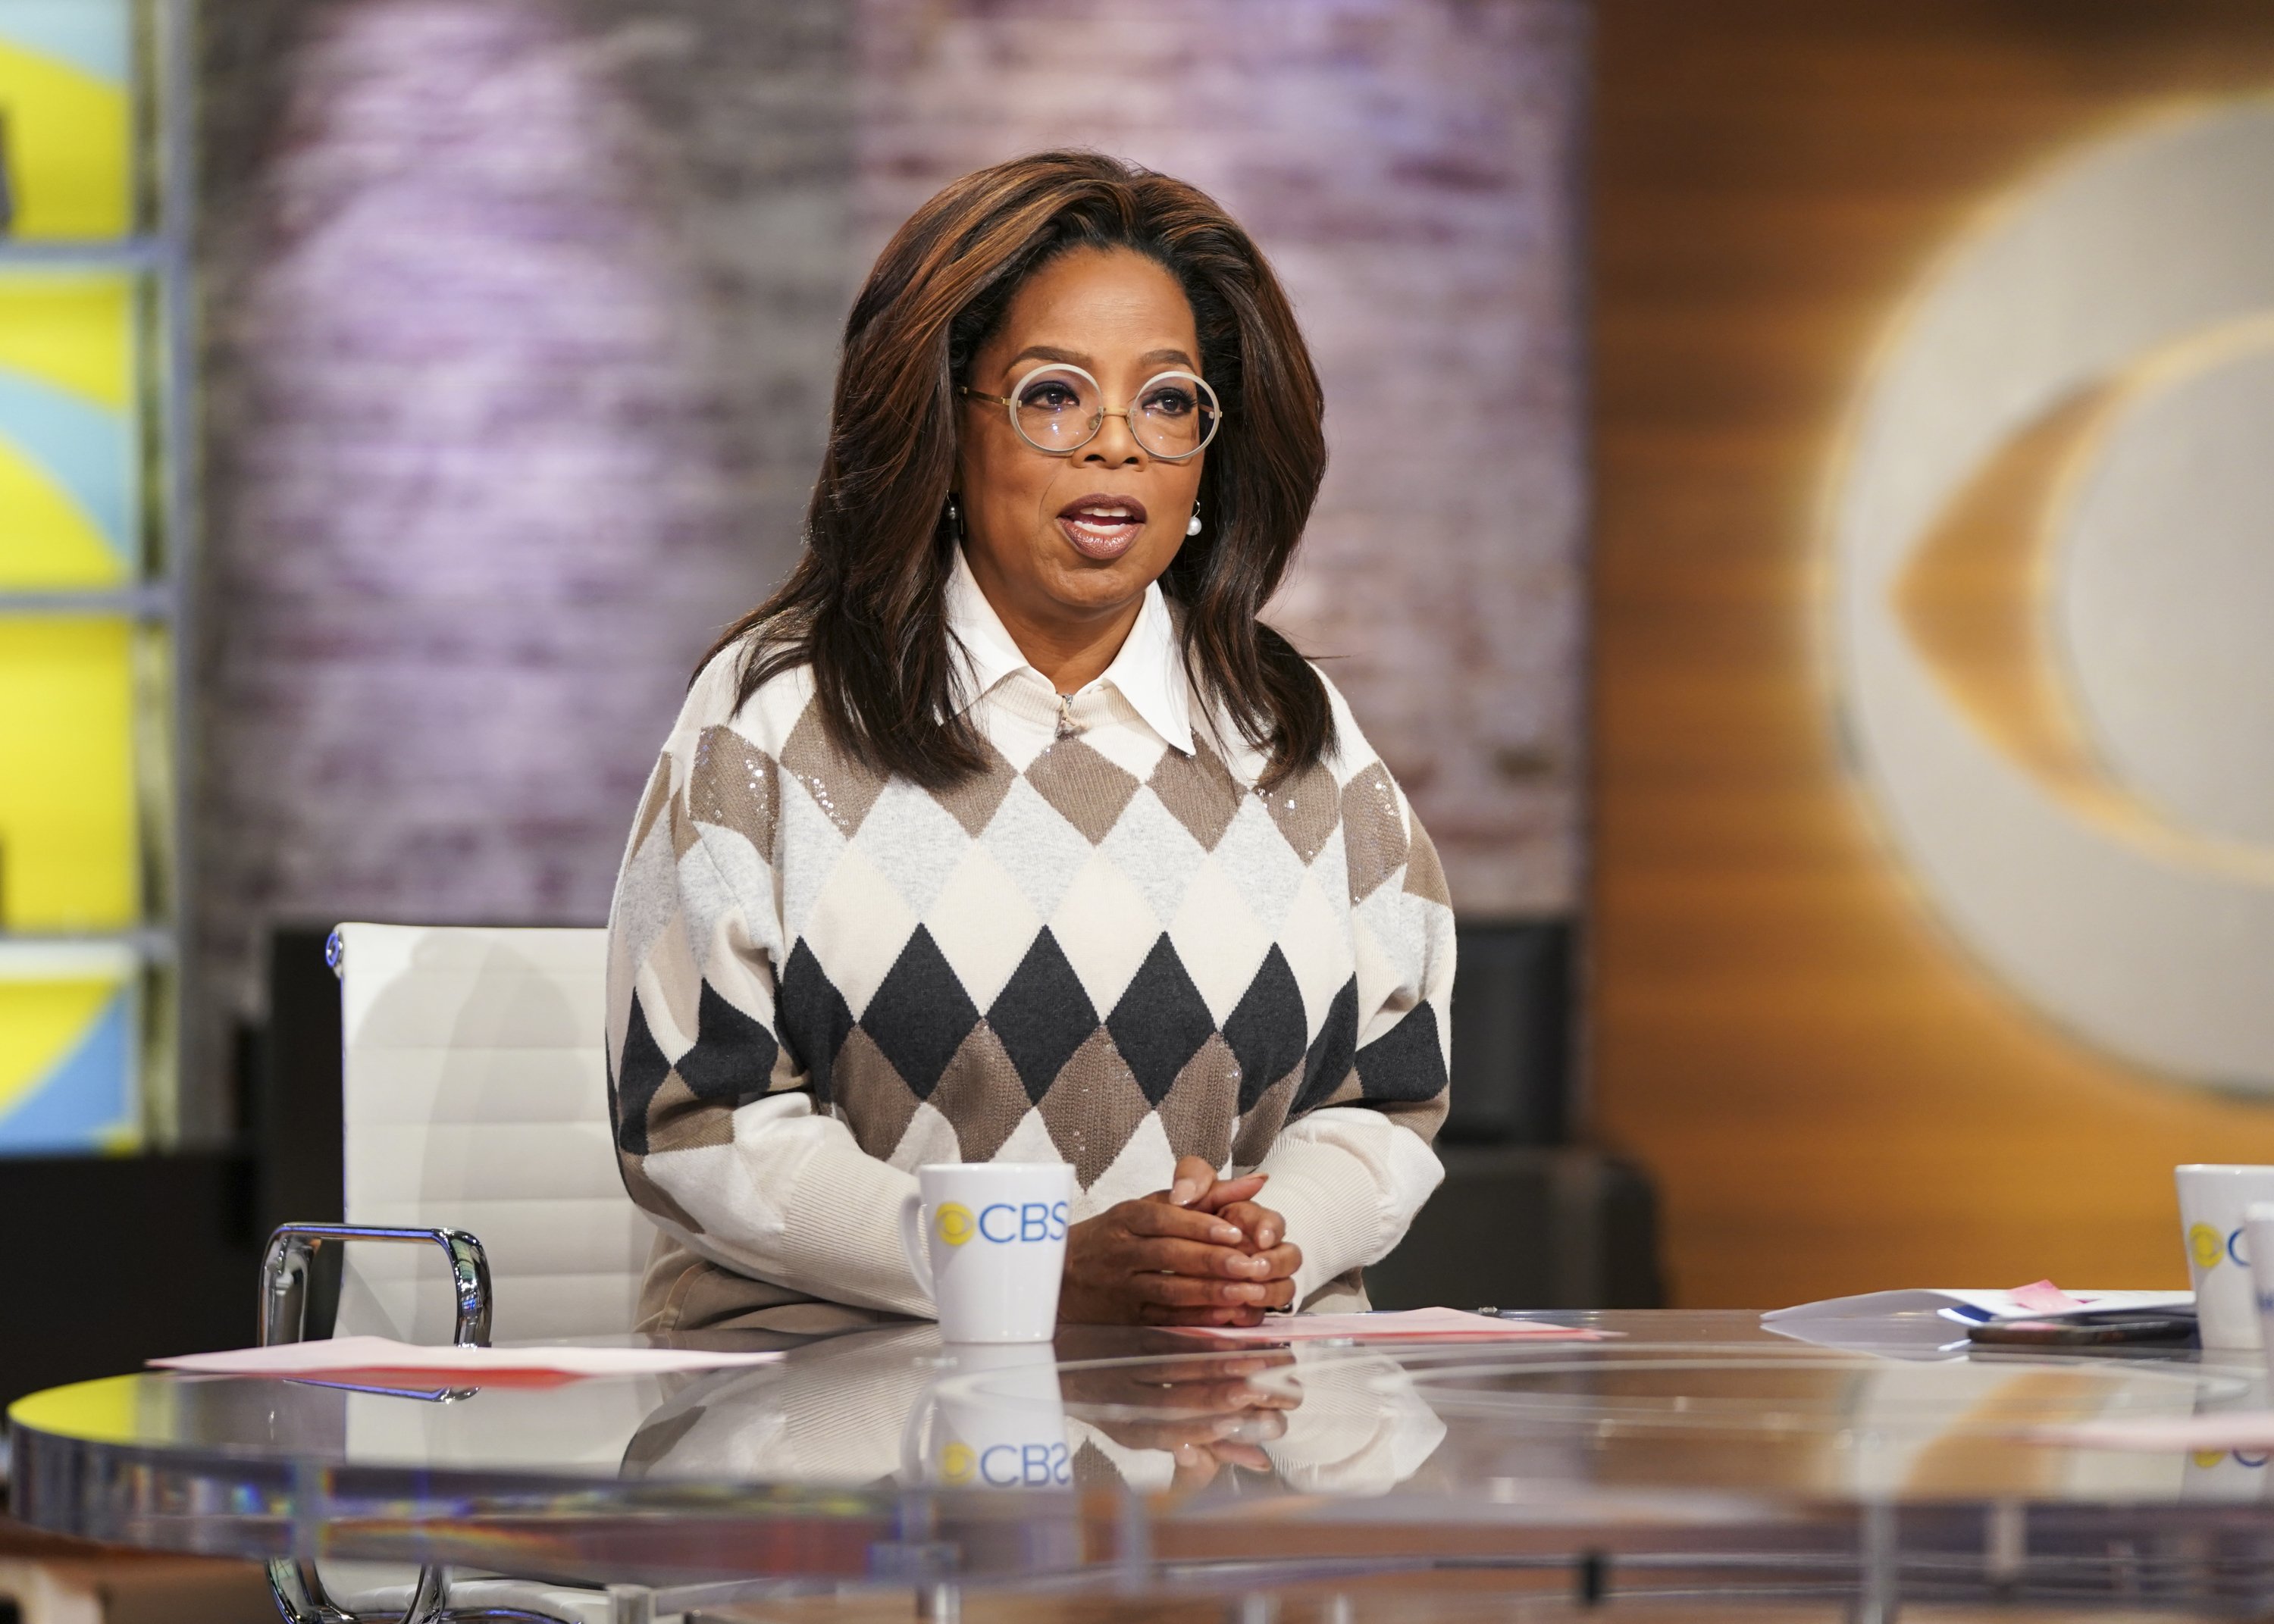 Oprah Winfrey on November 7, 2019 at the studios of "CBS This Morning" | Photo: Getty Images